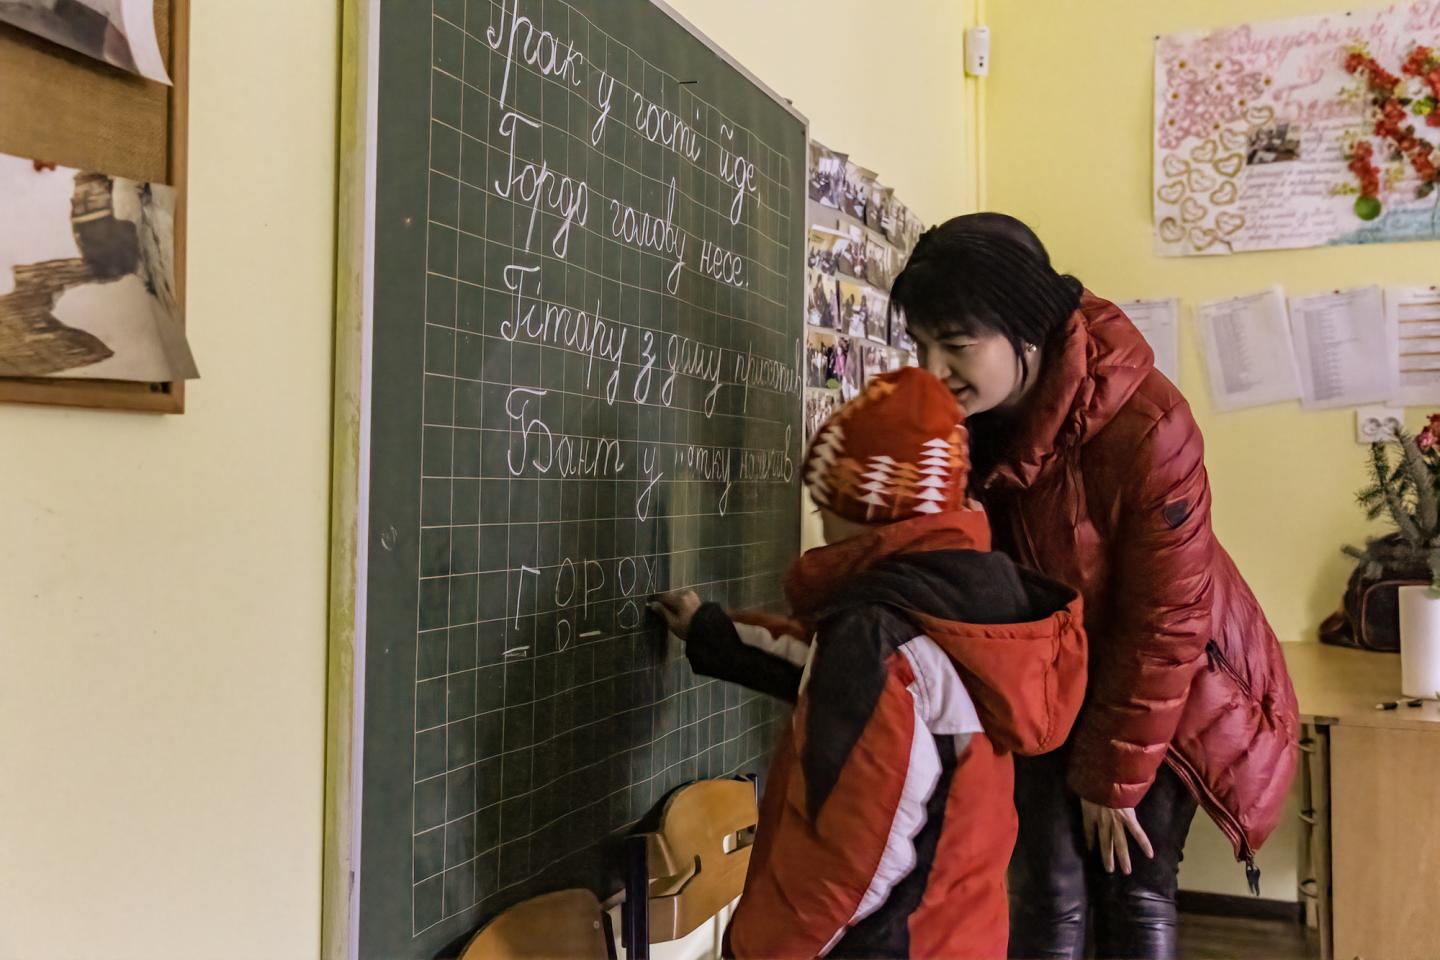 A woman teaching a child in a classroom